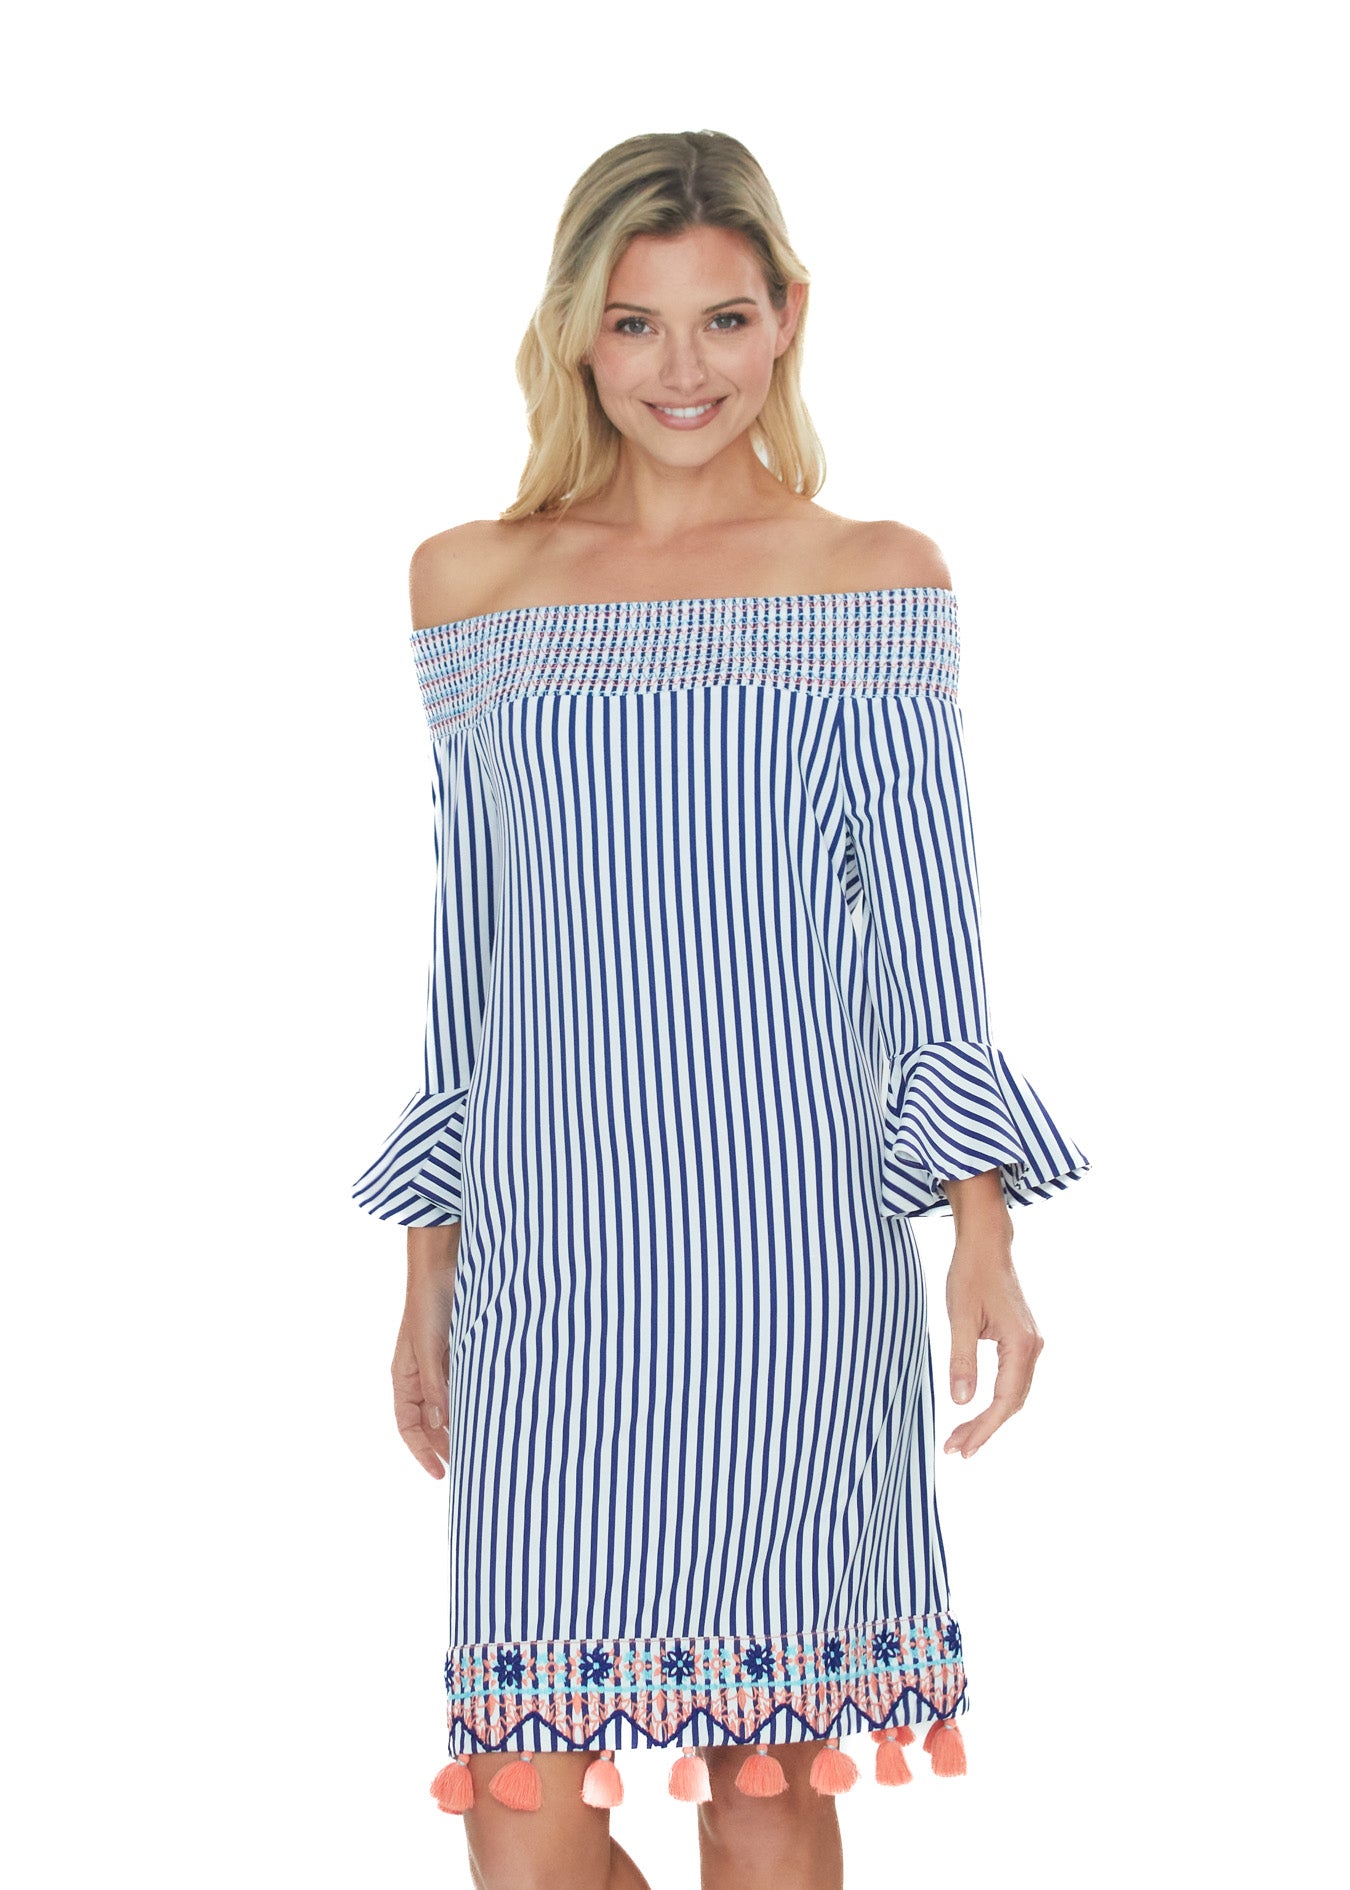 Smiling blonde woman wearing the St. Barts Off the Shoulder Dress.